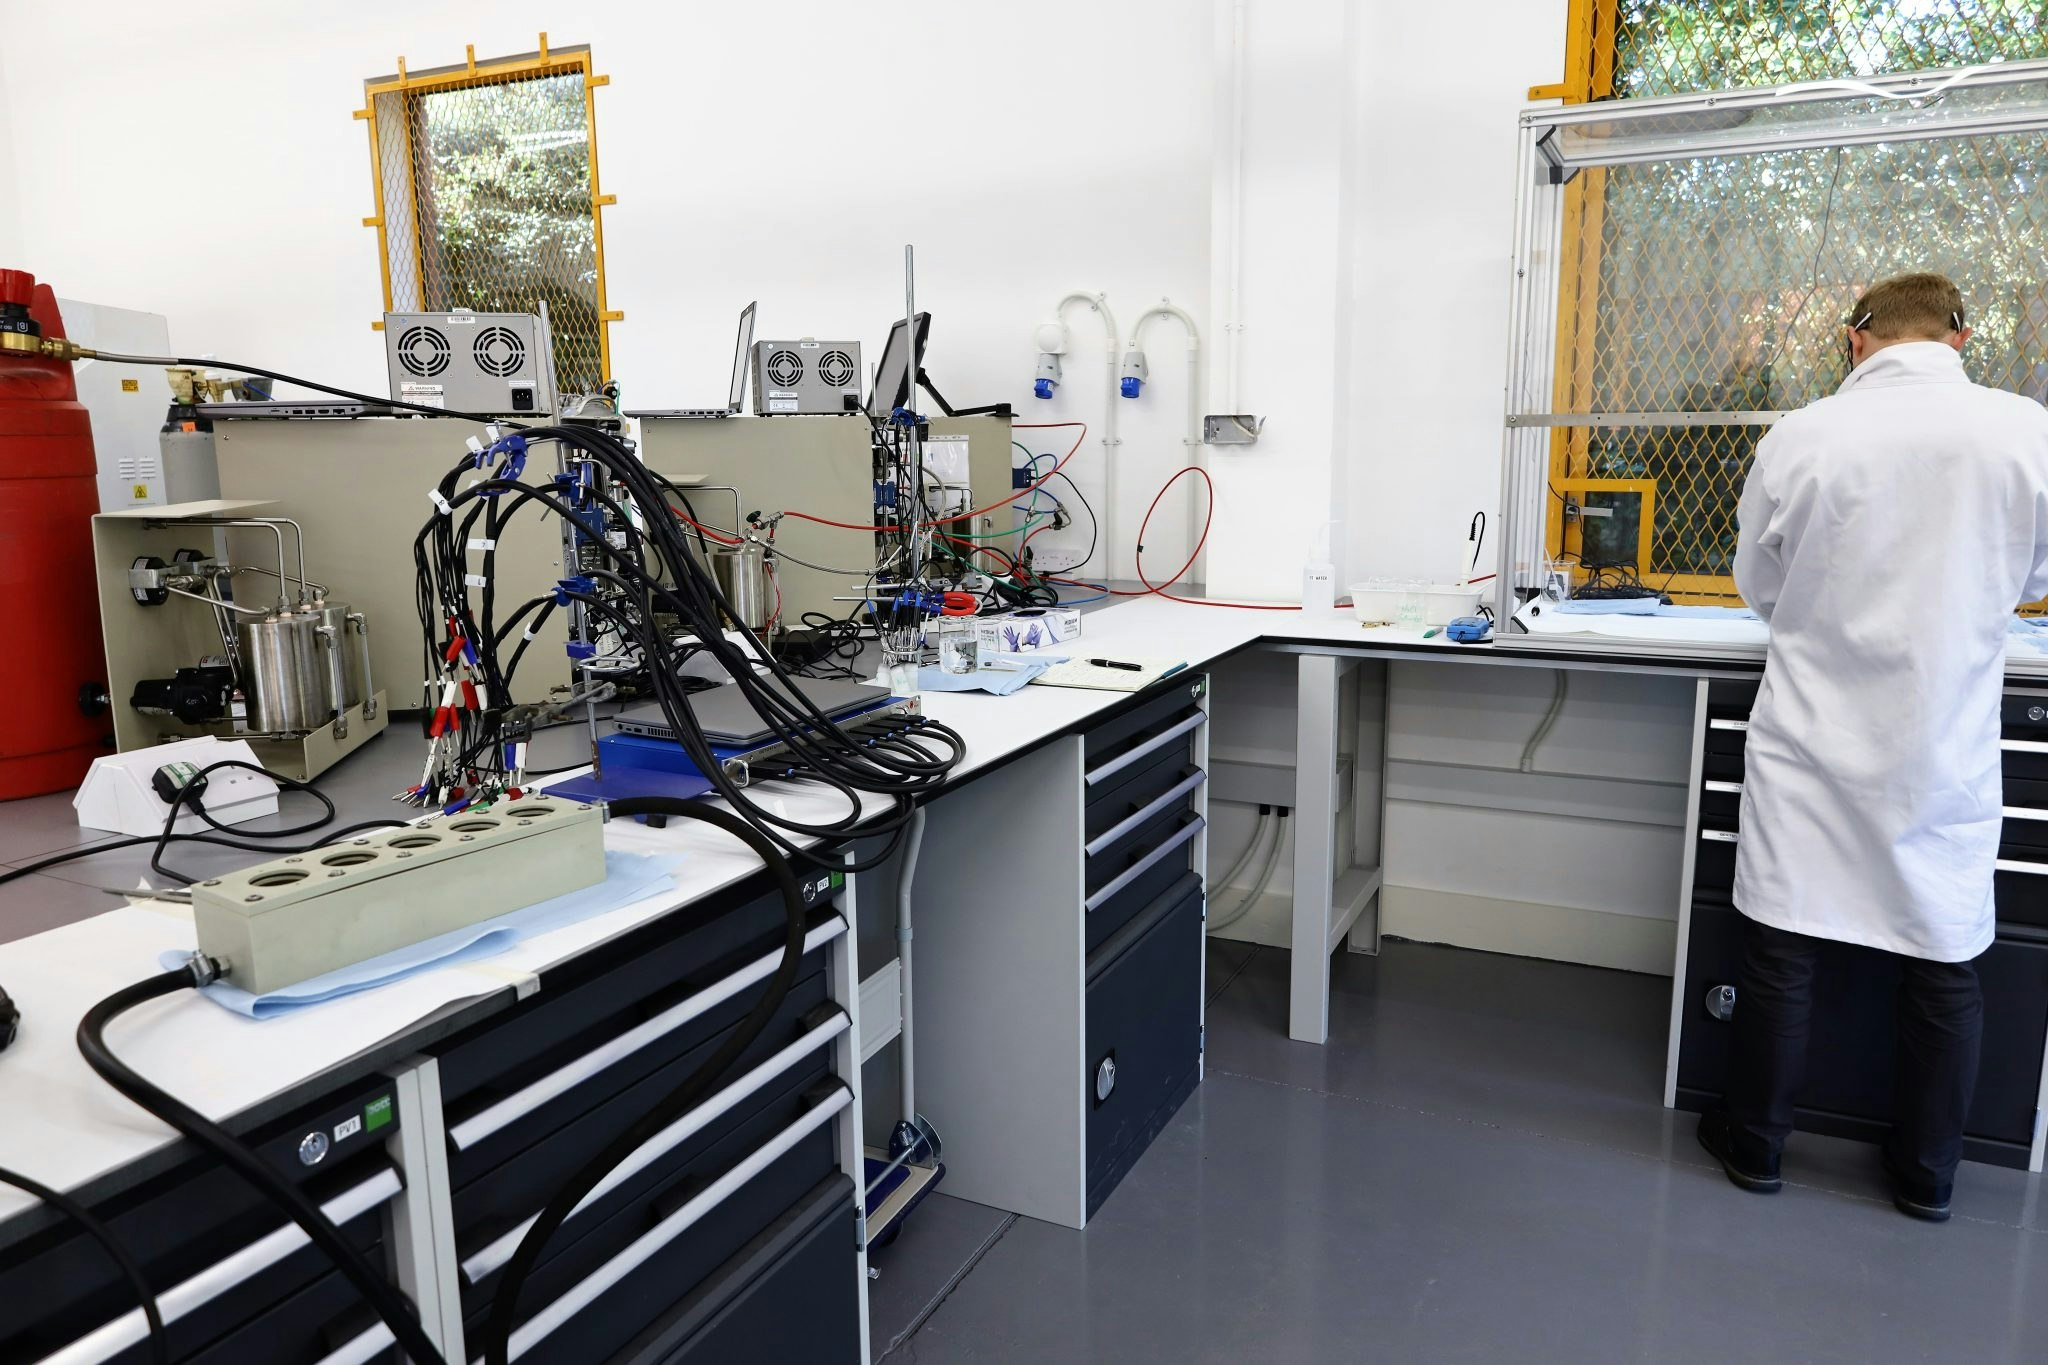 Hydrogen fuel cell parts in a lab at Bramble's headquarters